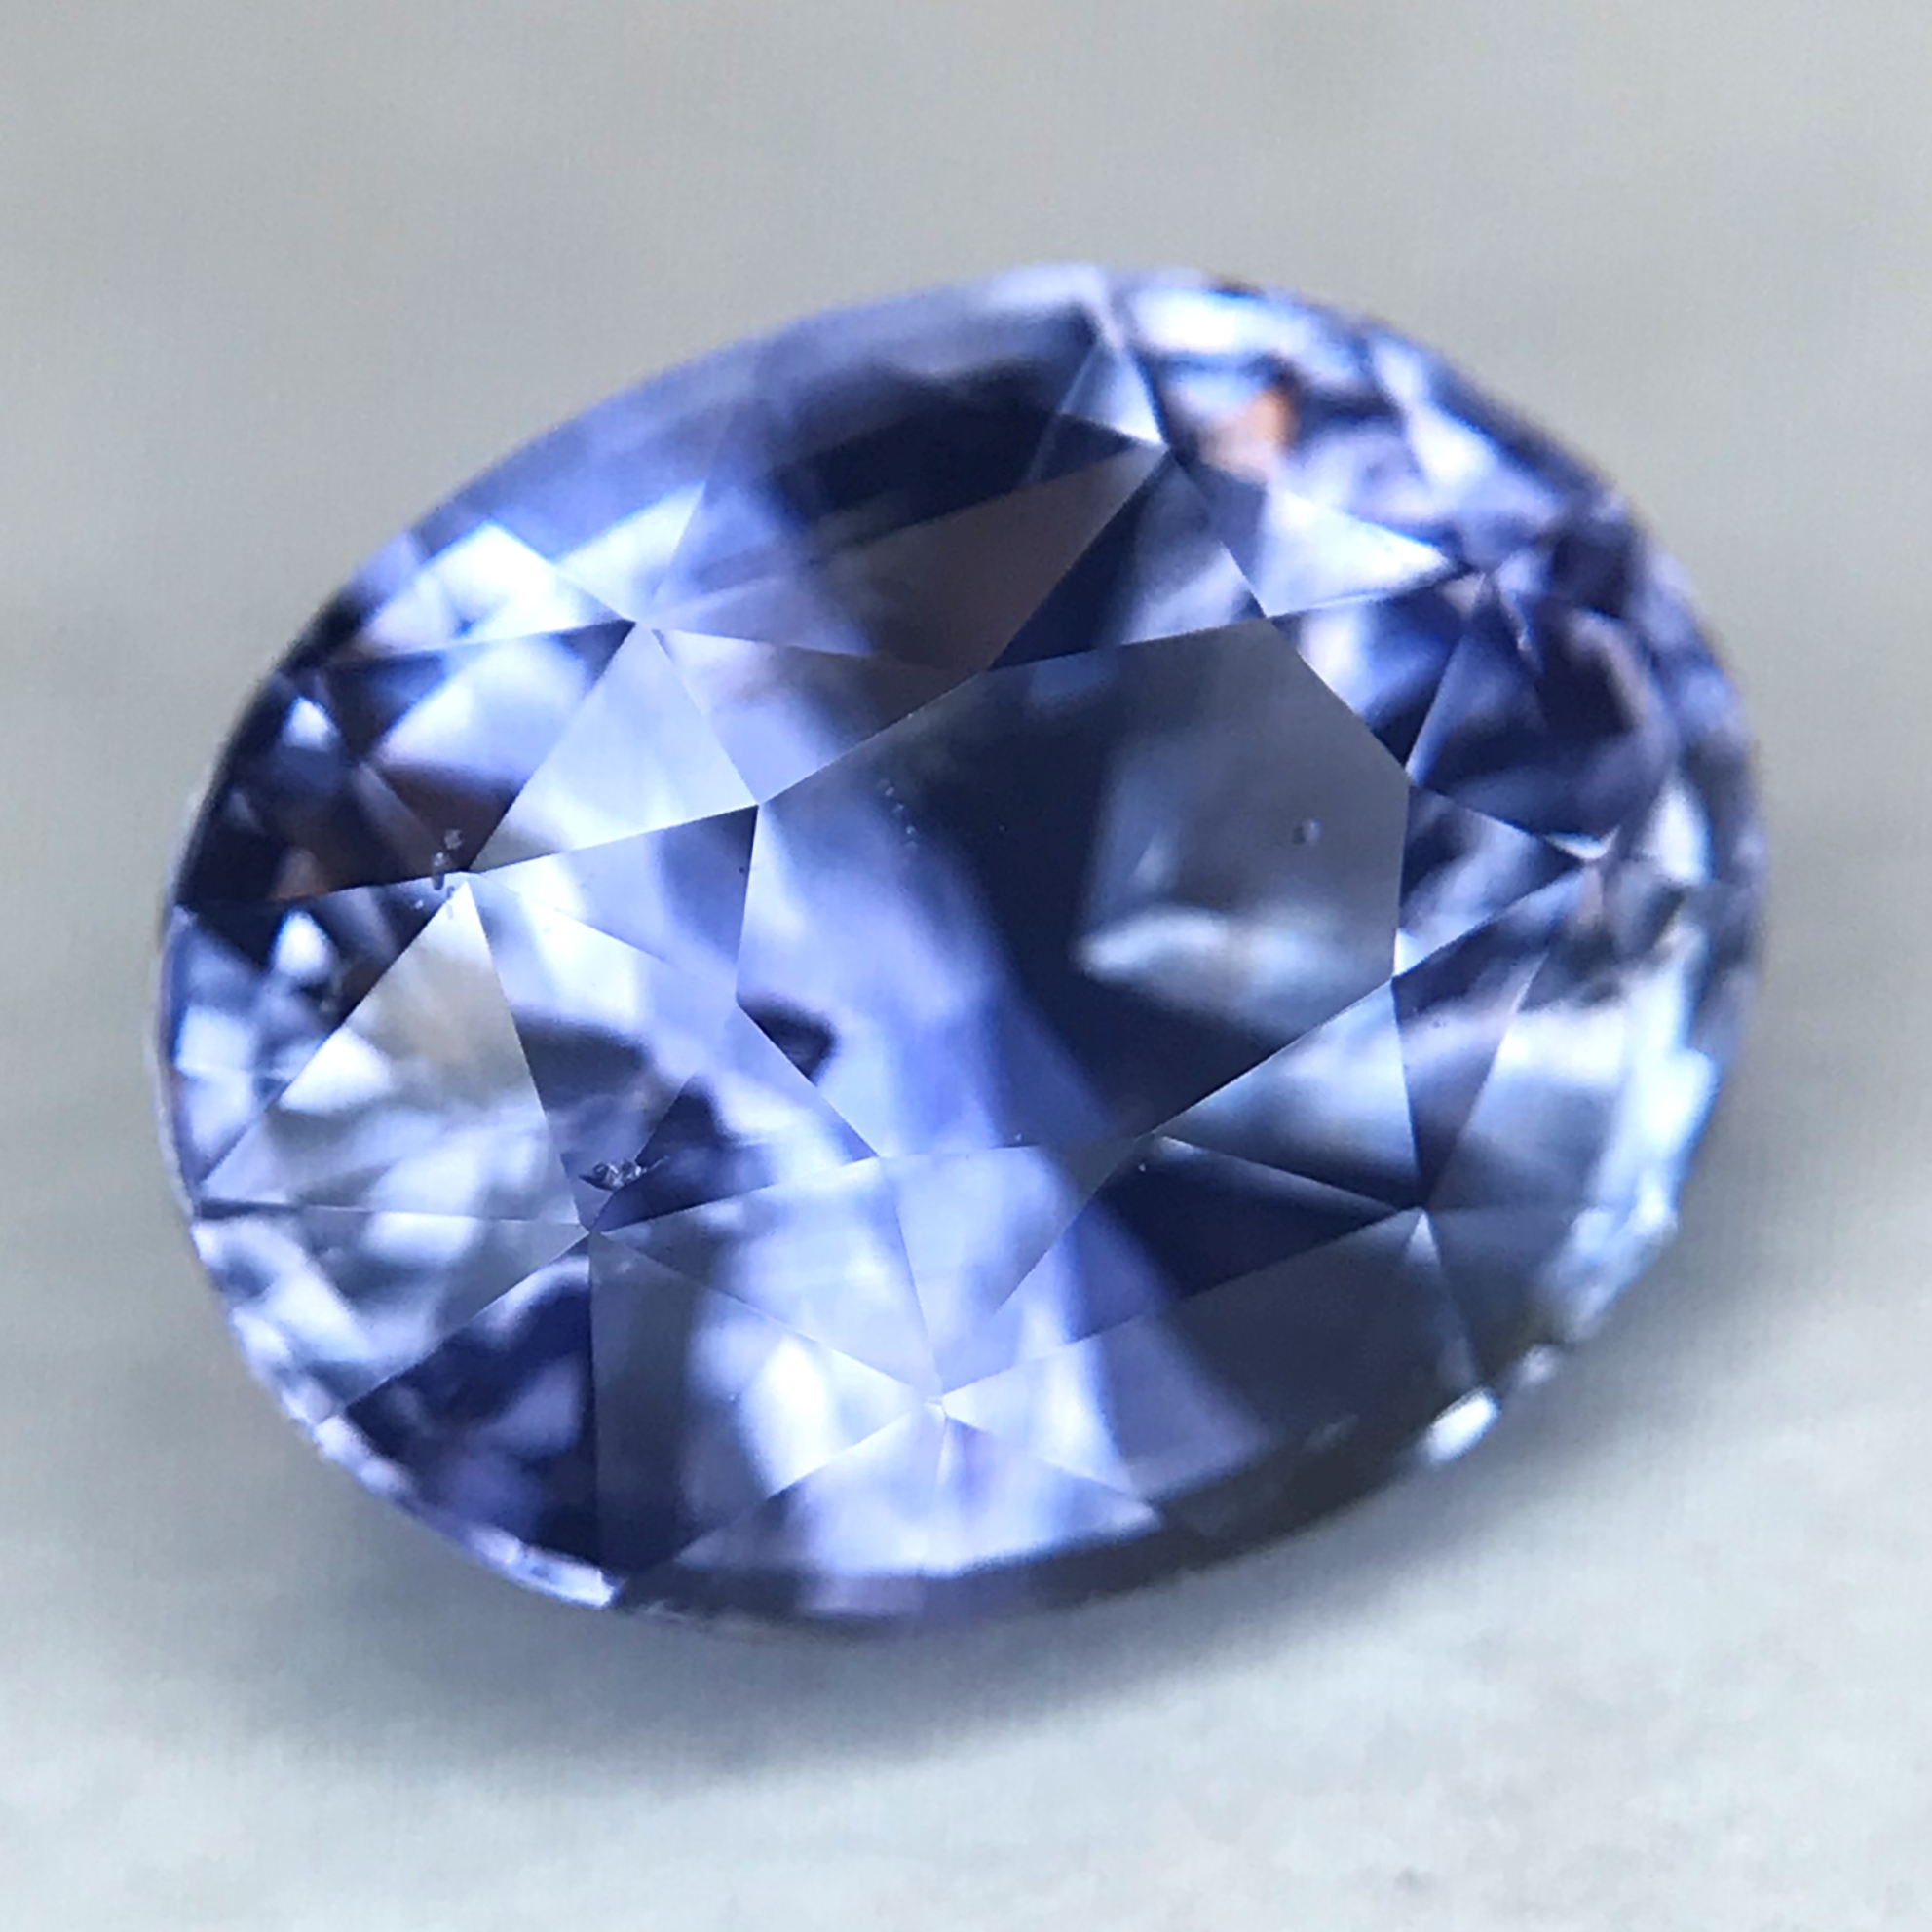 2.60ct Oval Mixed Cut Sapphire